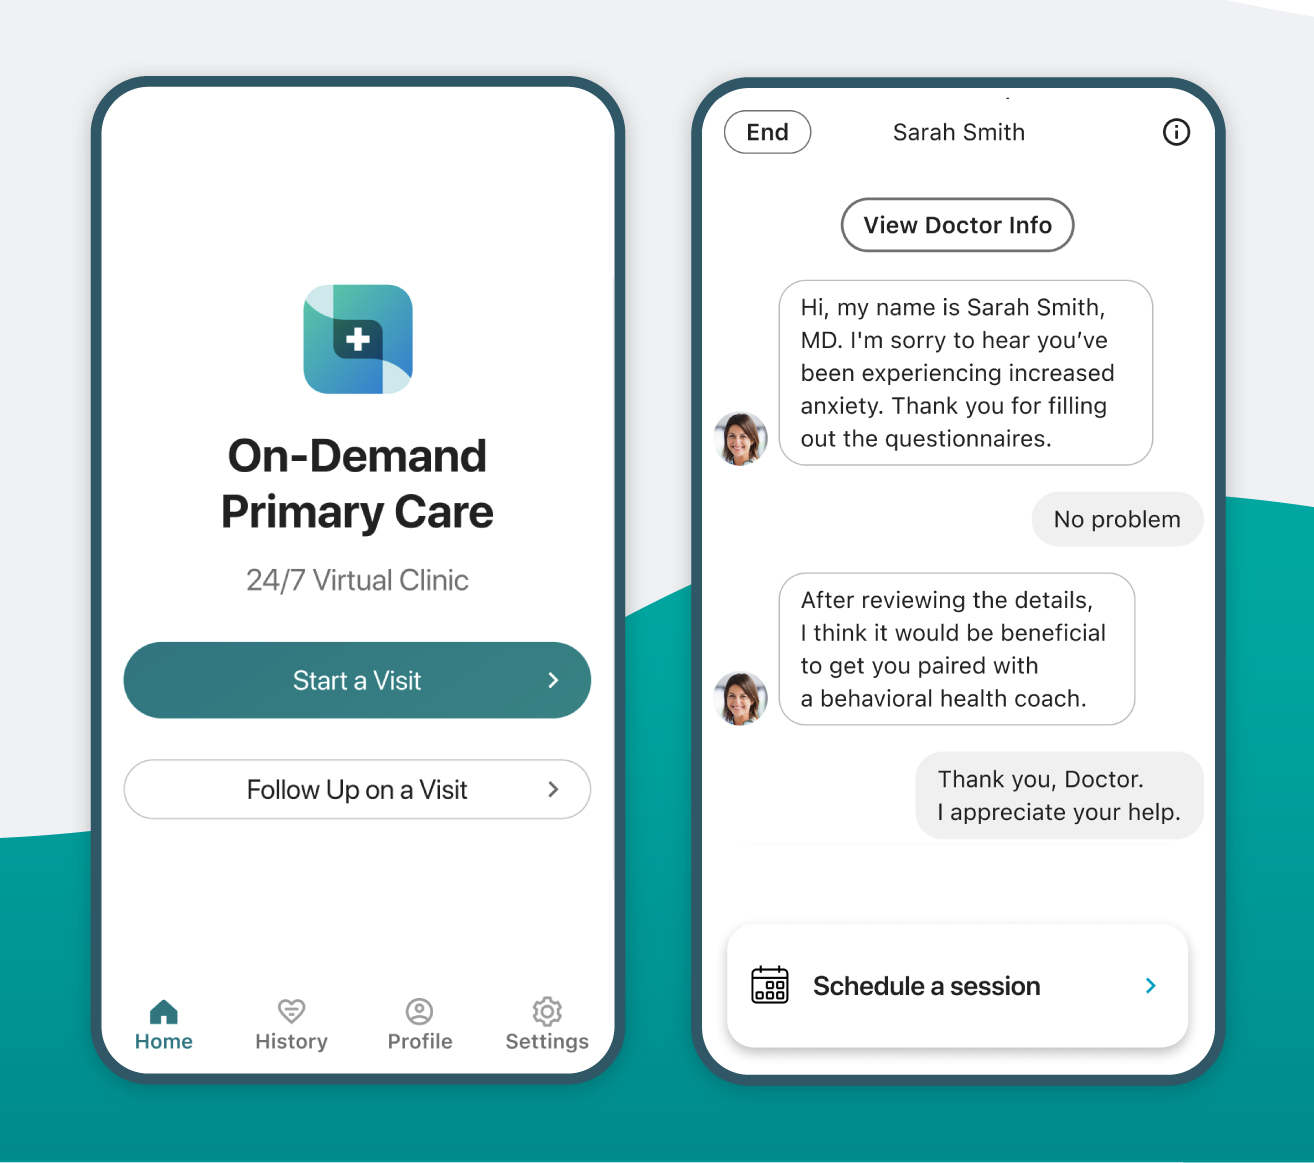 98point6 Launches New Virtual Care Service to Address Rising Demand for Mental Health Support